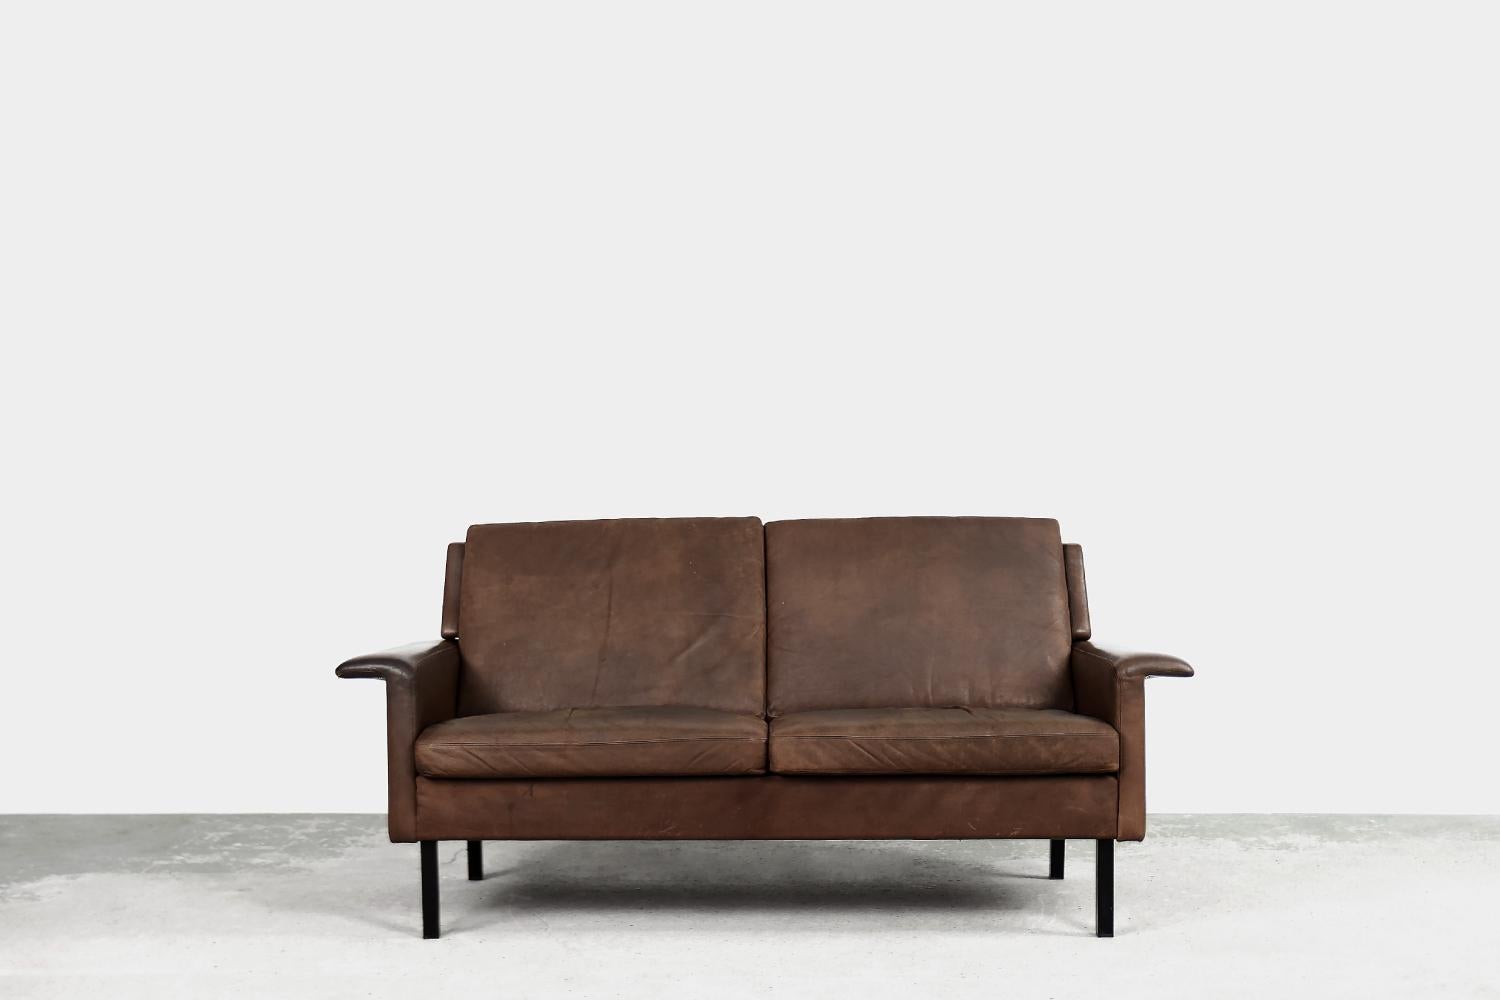 Mid-Century Modern 2-Seater Brown Leather Sofa3330 by A. Vodder for Fritz Hansen In Good Condition For Sale In Warszawa, Mazowieckie